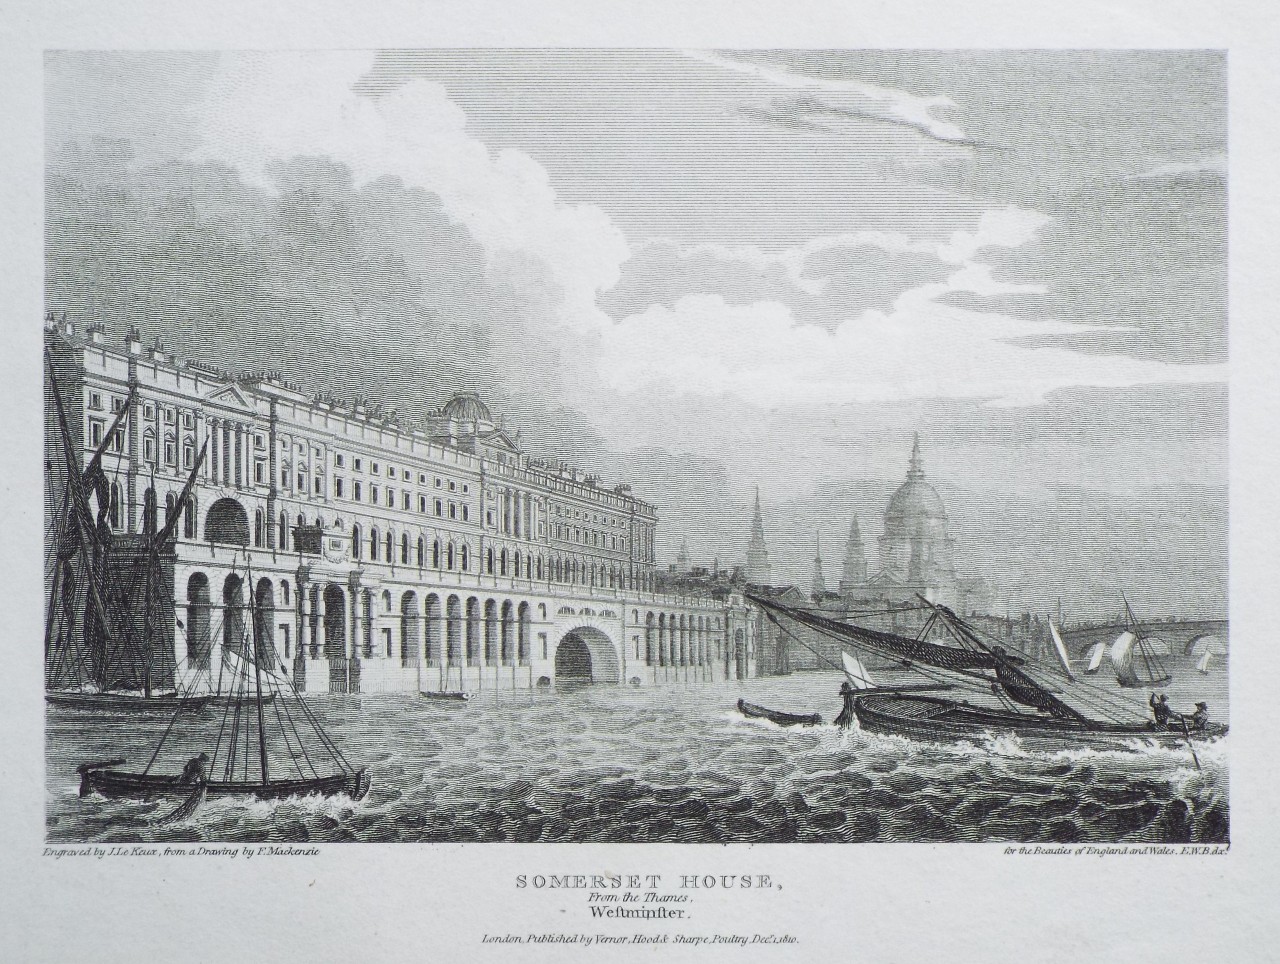 Print - Somerset House, from the Thames, Westminster. - Le